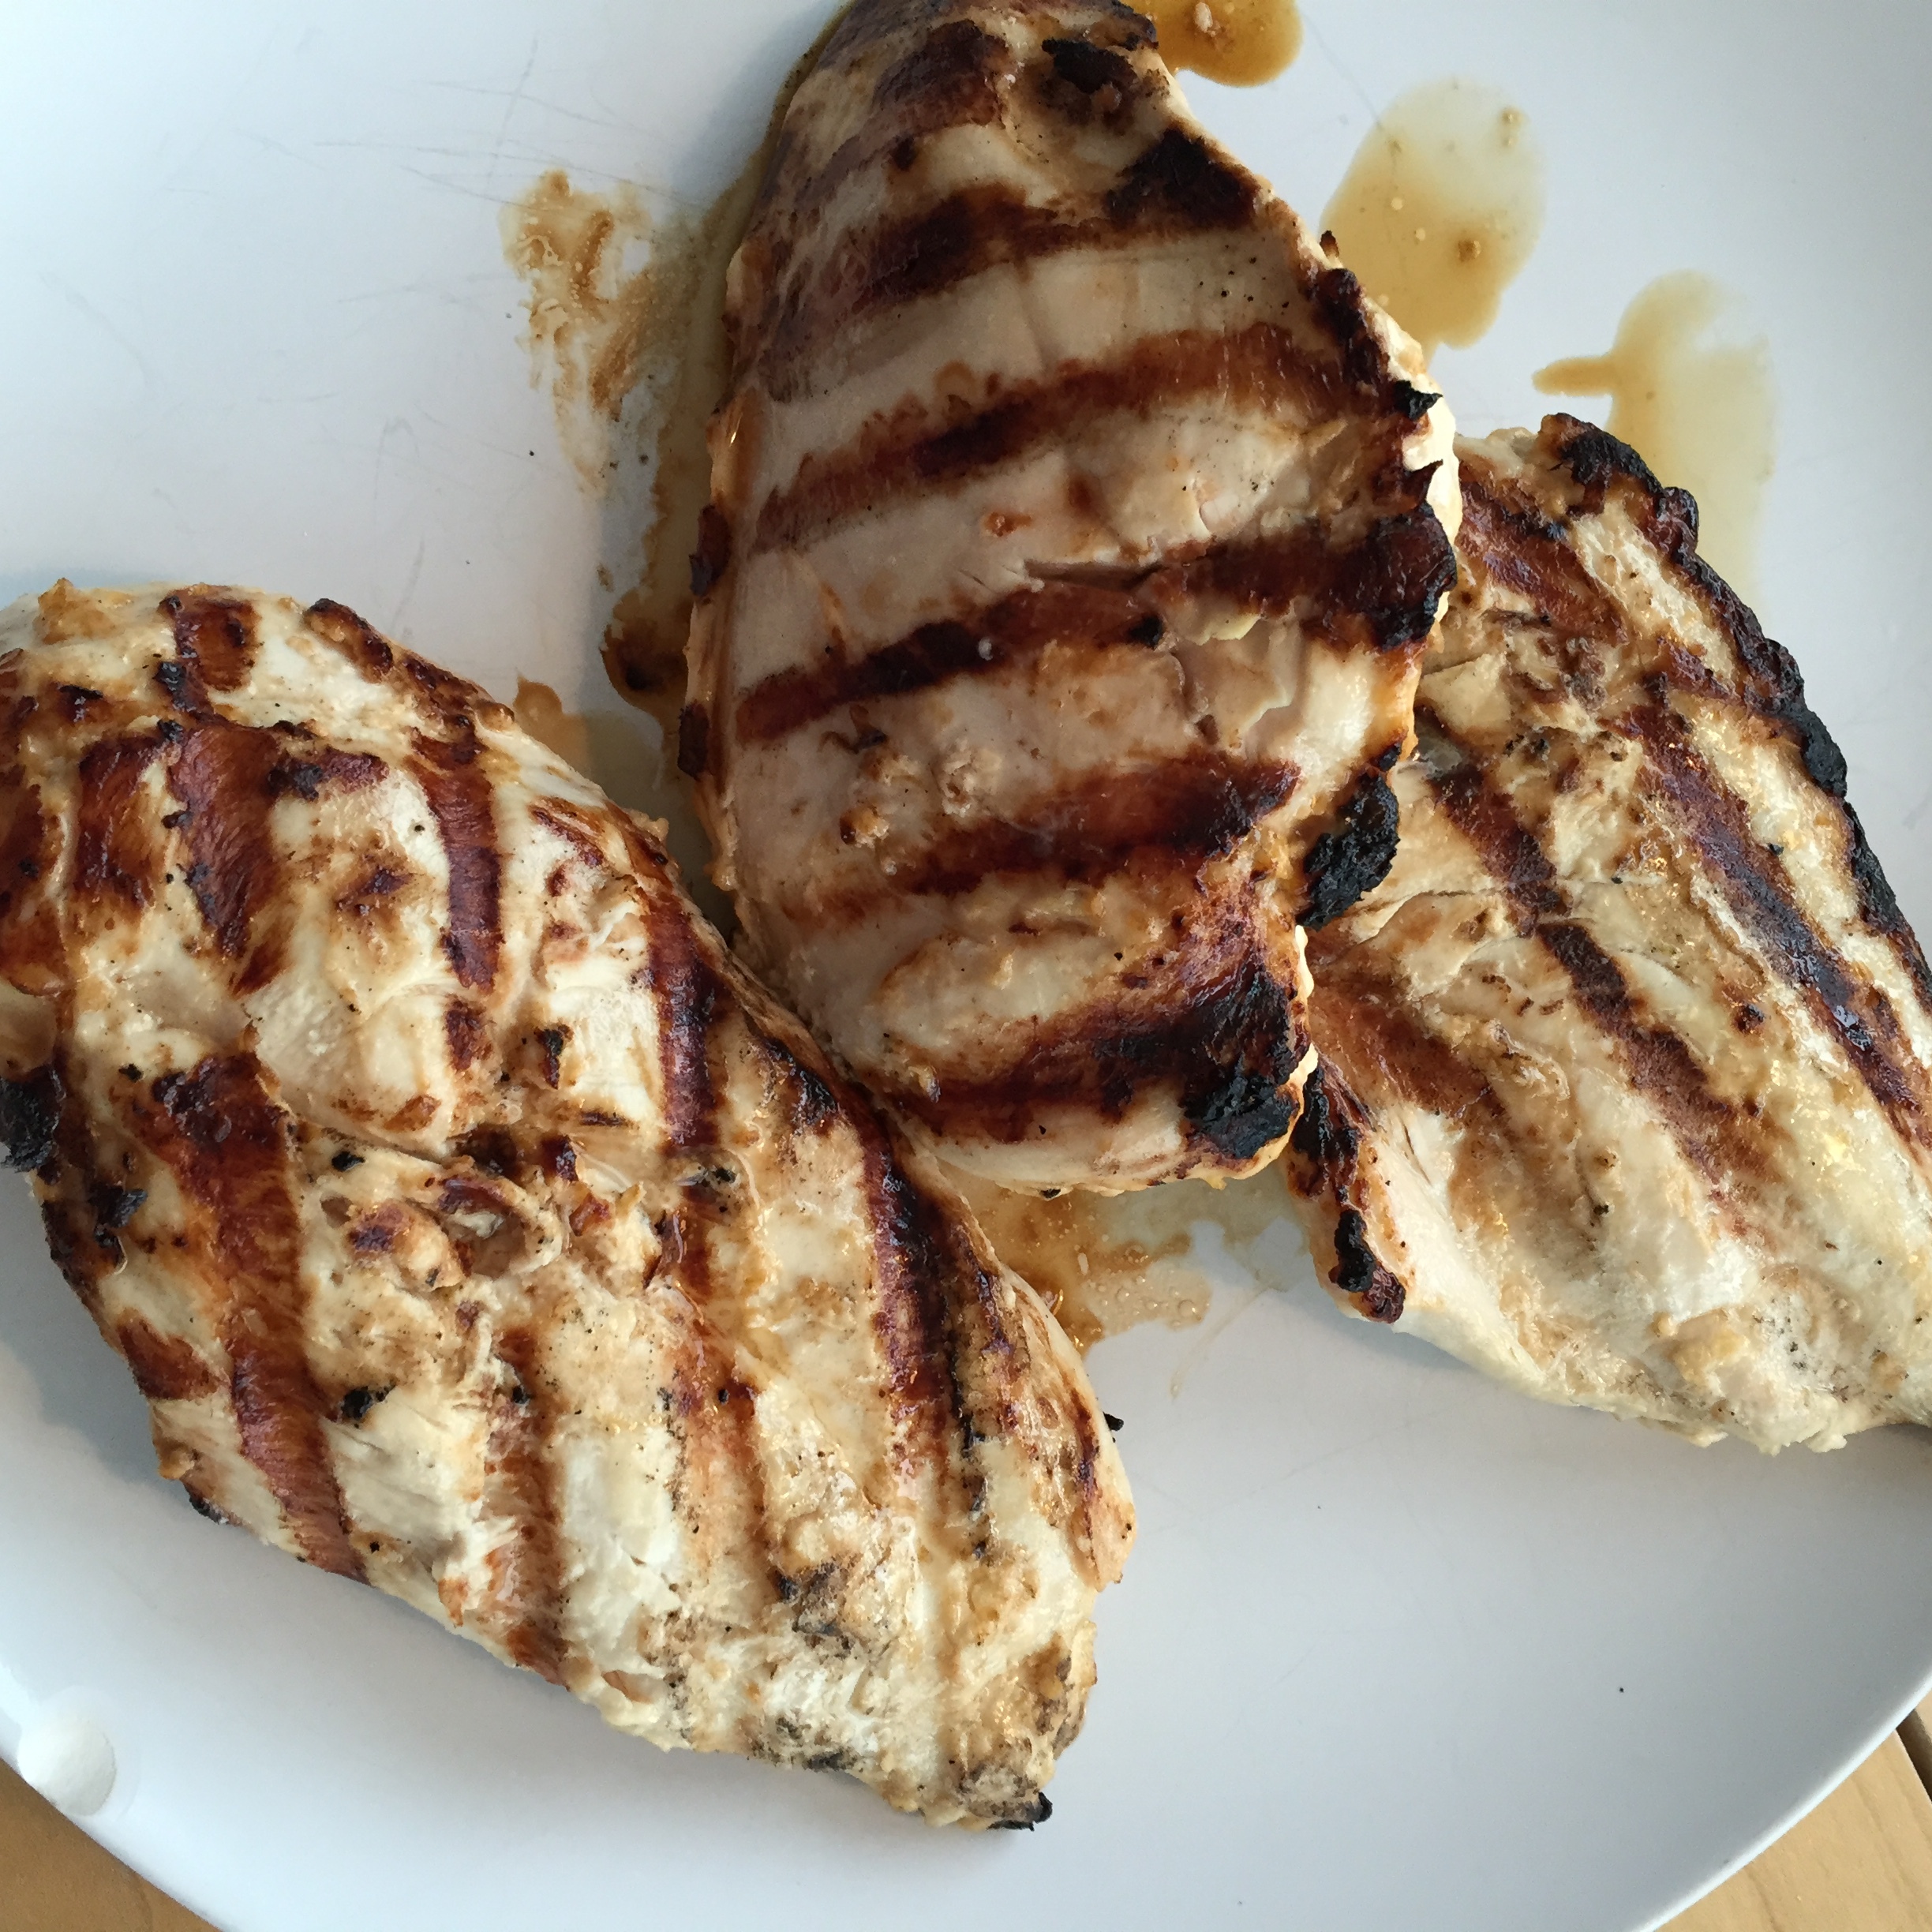 extra-juicy grilled chicken breasts